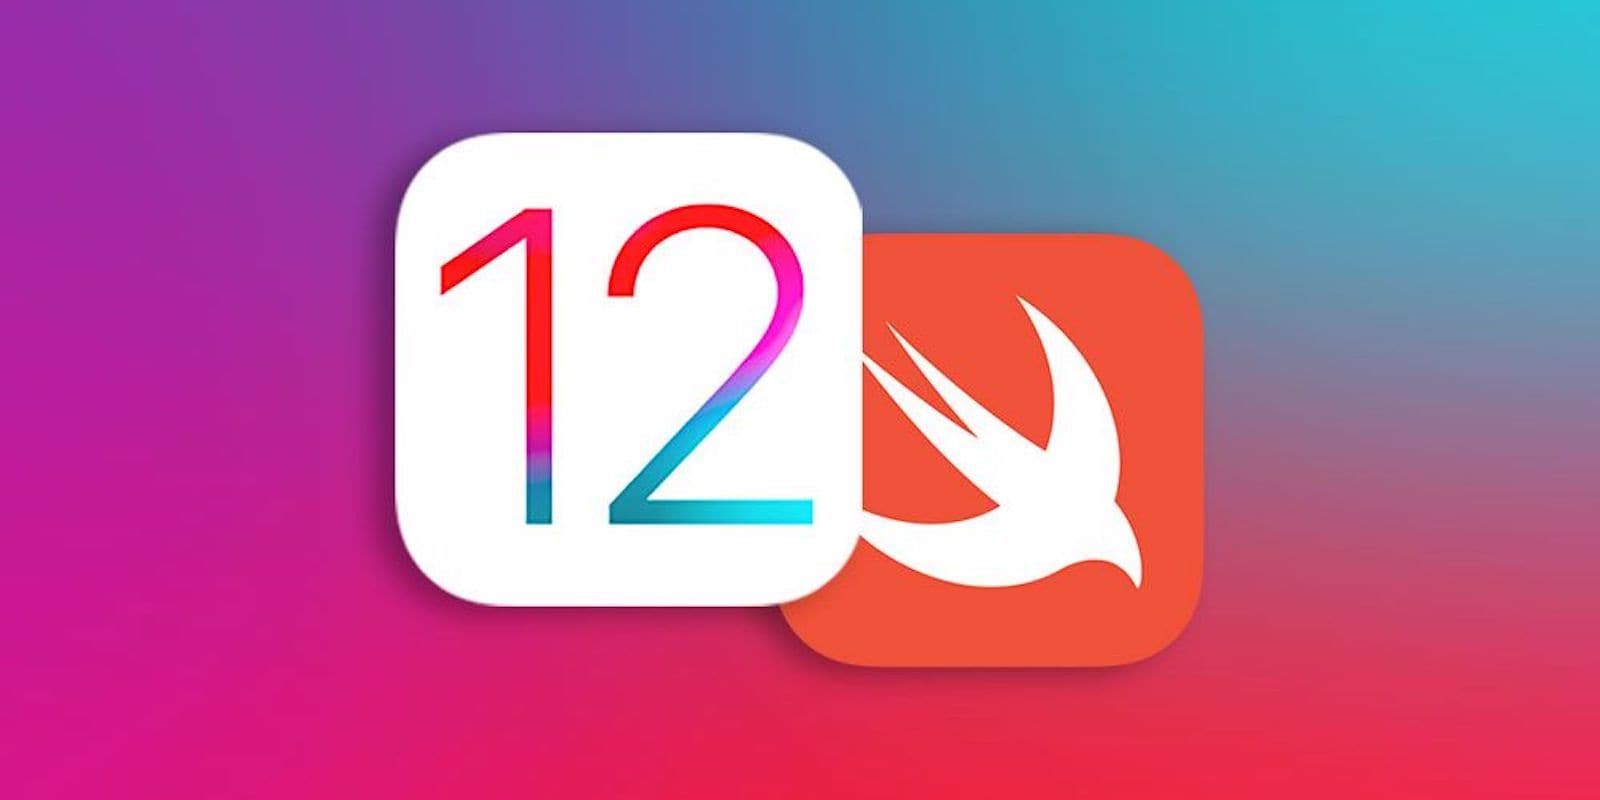 Expand your professional and creative toolkit by mastering the many facets of iOS 12 development.